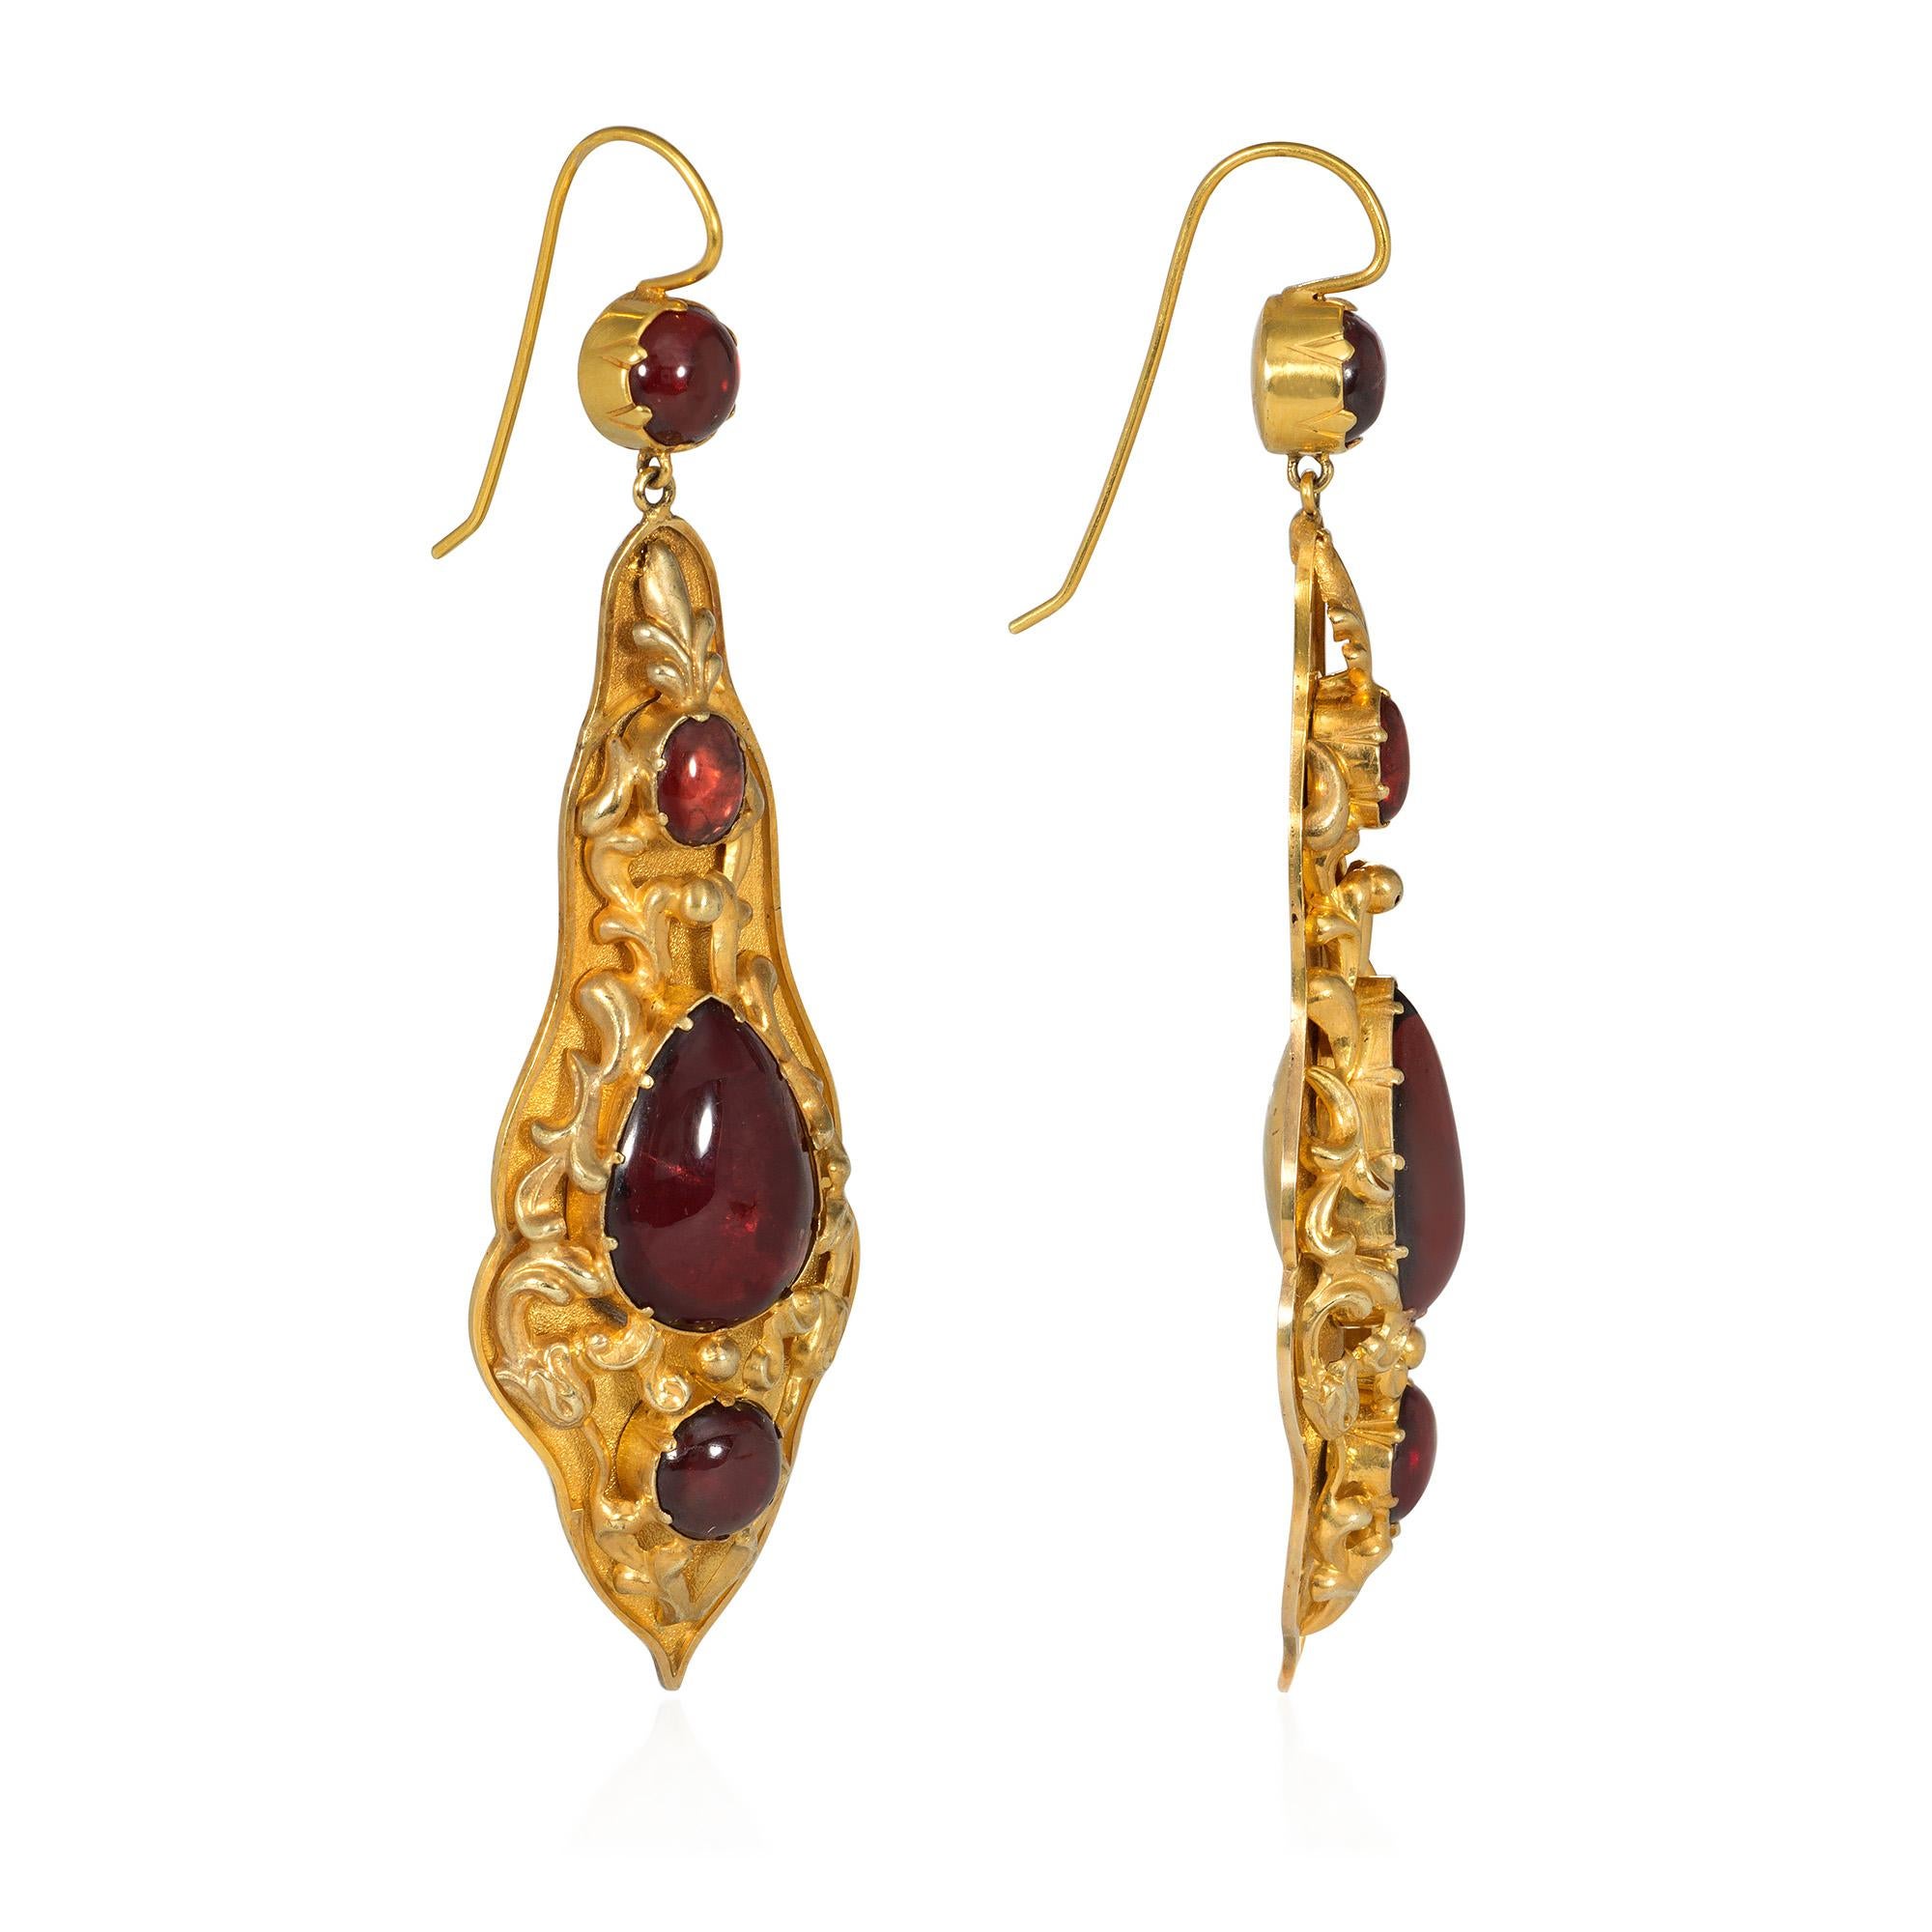 A pair of antique Georgian period gold and close-backed garnet earrings, the long pendants of tapering design and set with oval, pear, and round cabochon garnets surrounded by applied gold repoussé decoration, suspending from round cabochon garnet